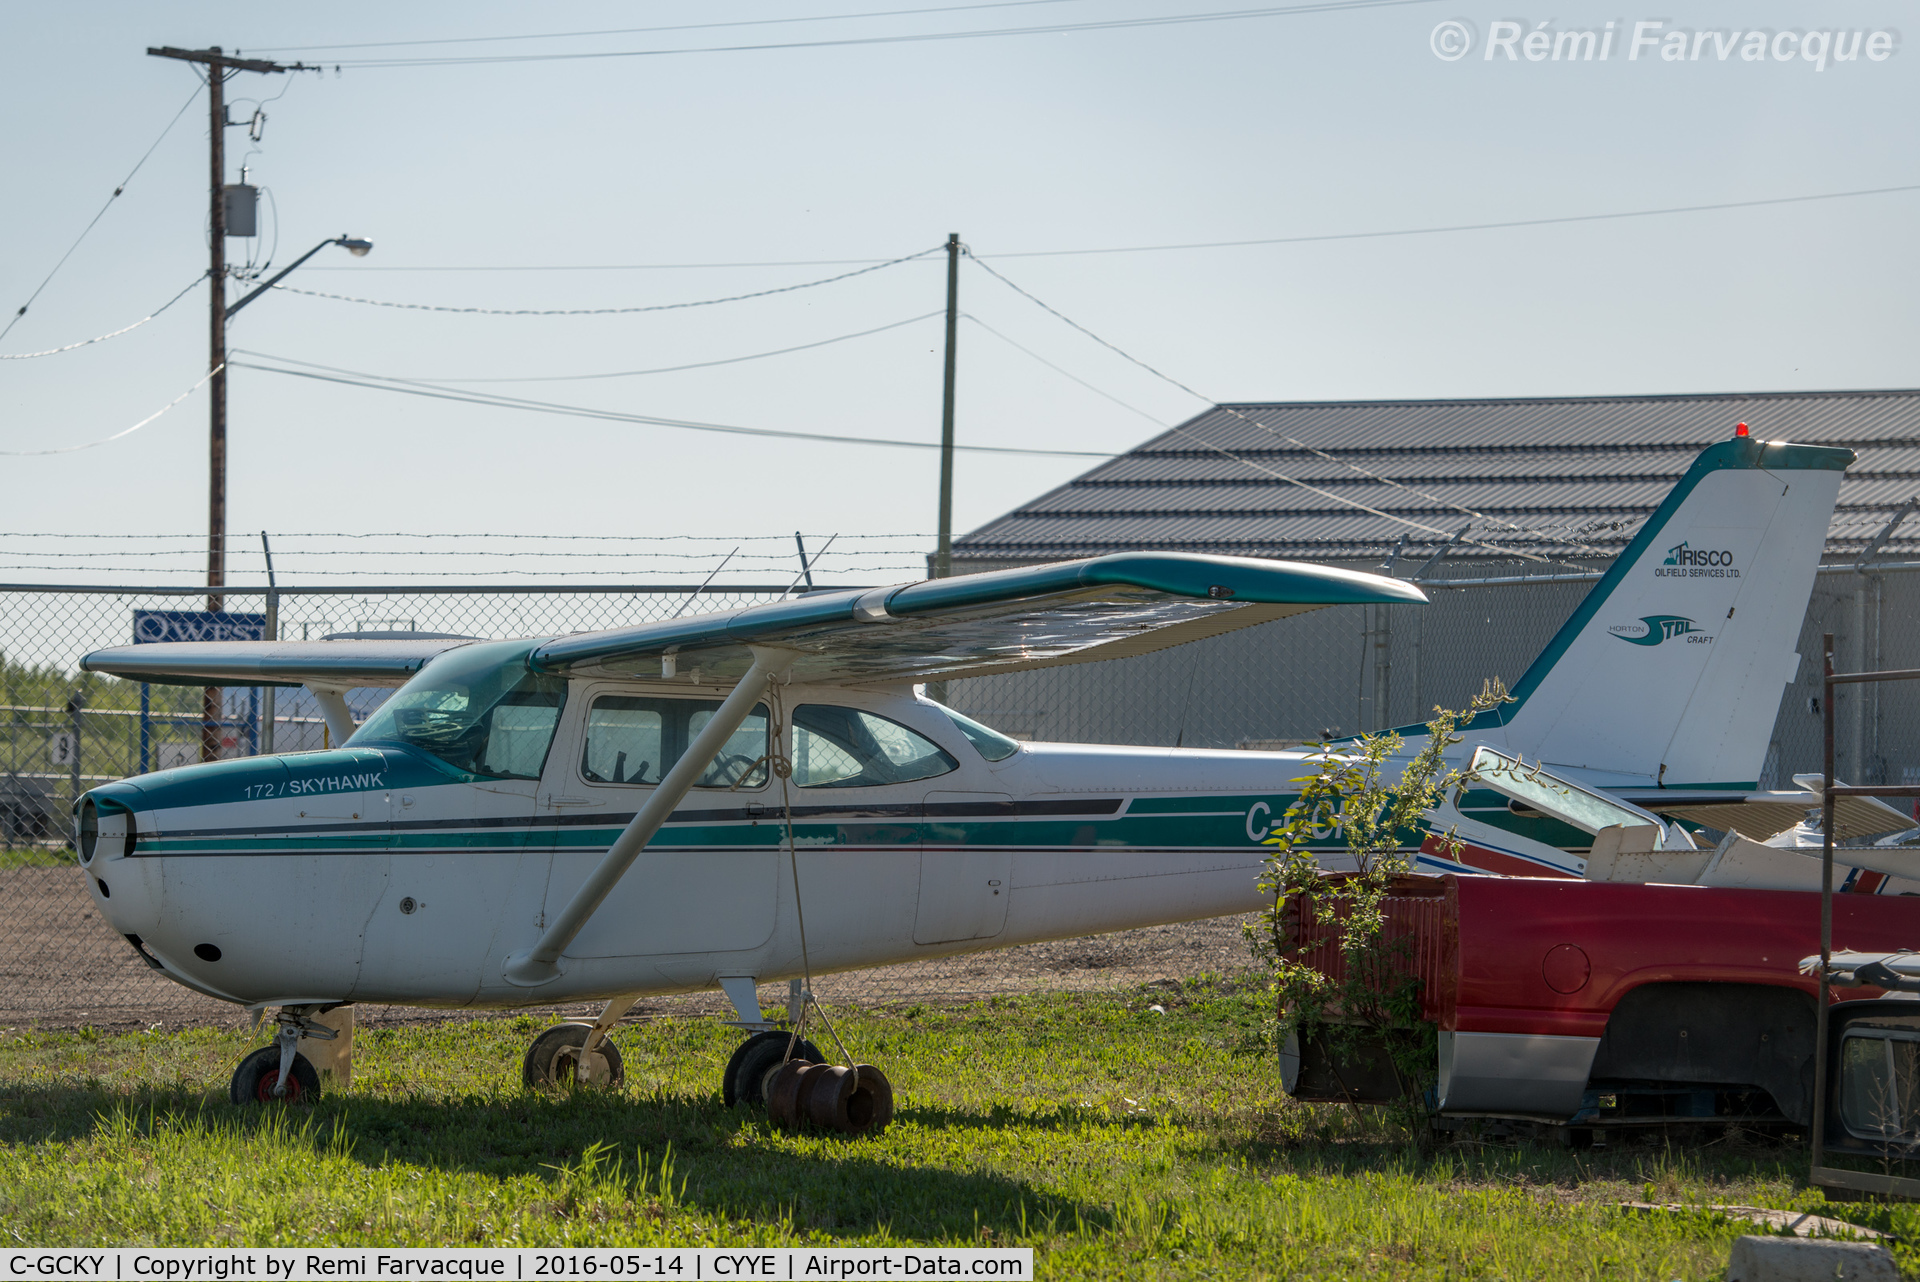 C-GCKY, 1966 Cessna 172G C/N 172-54580, Parked by private hanger, east side of airport.